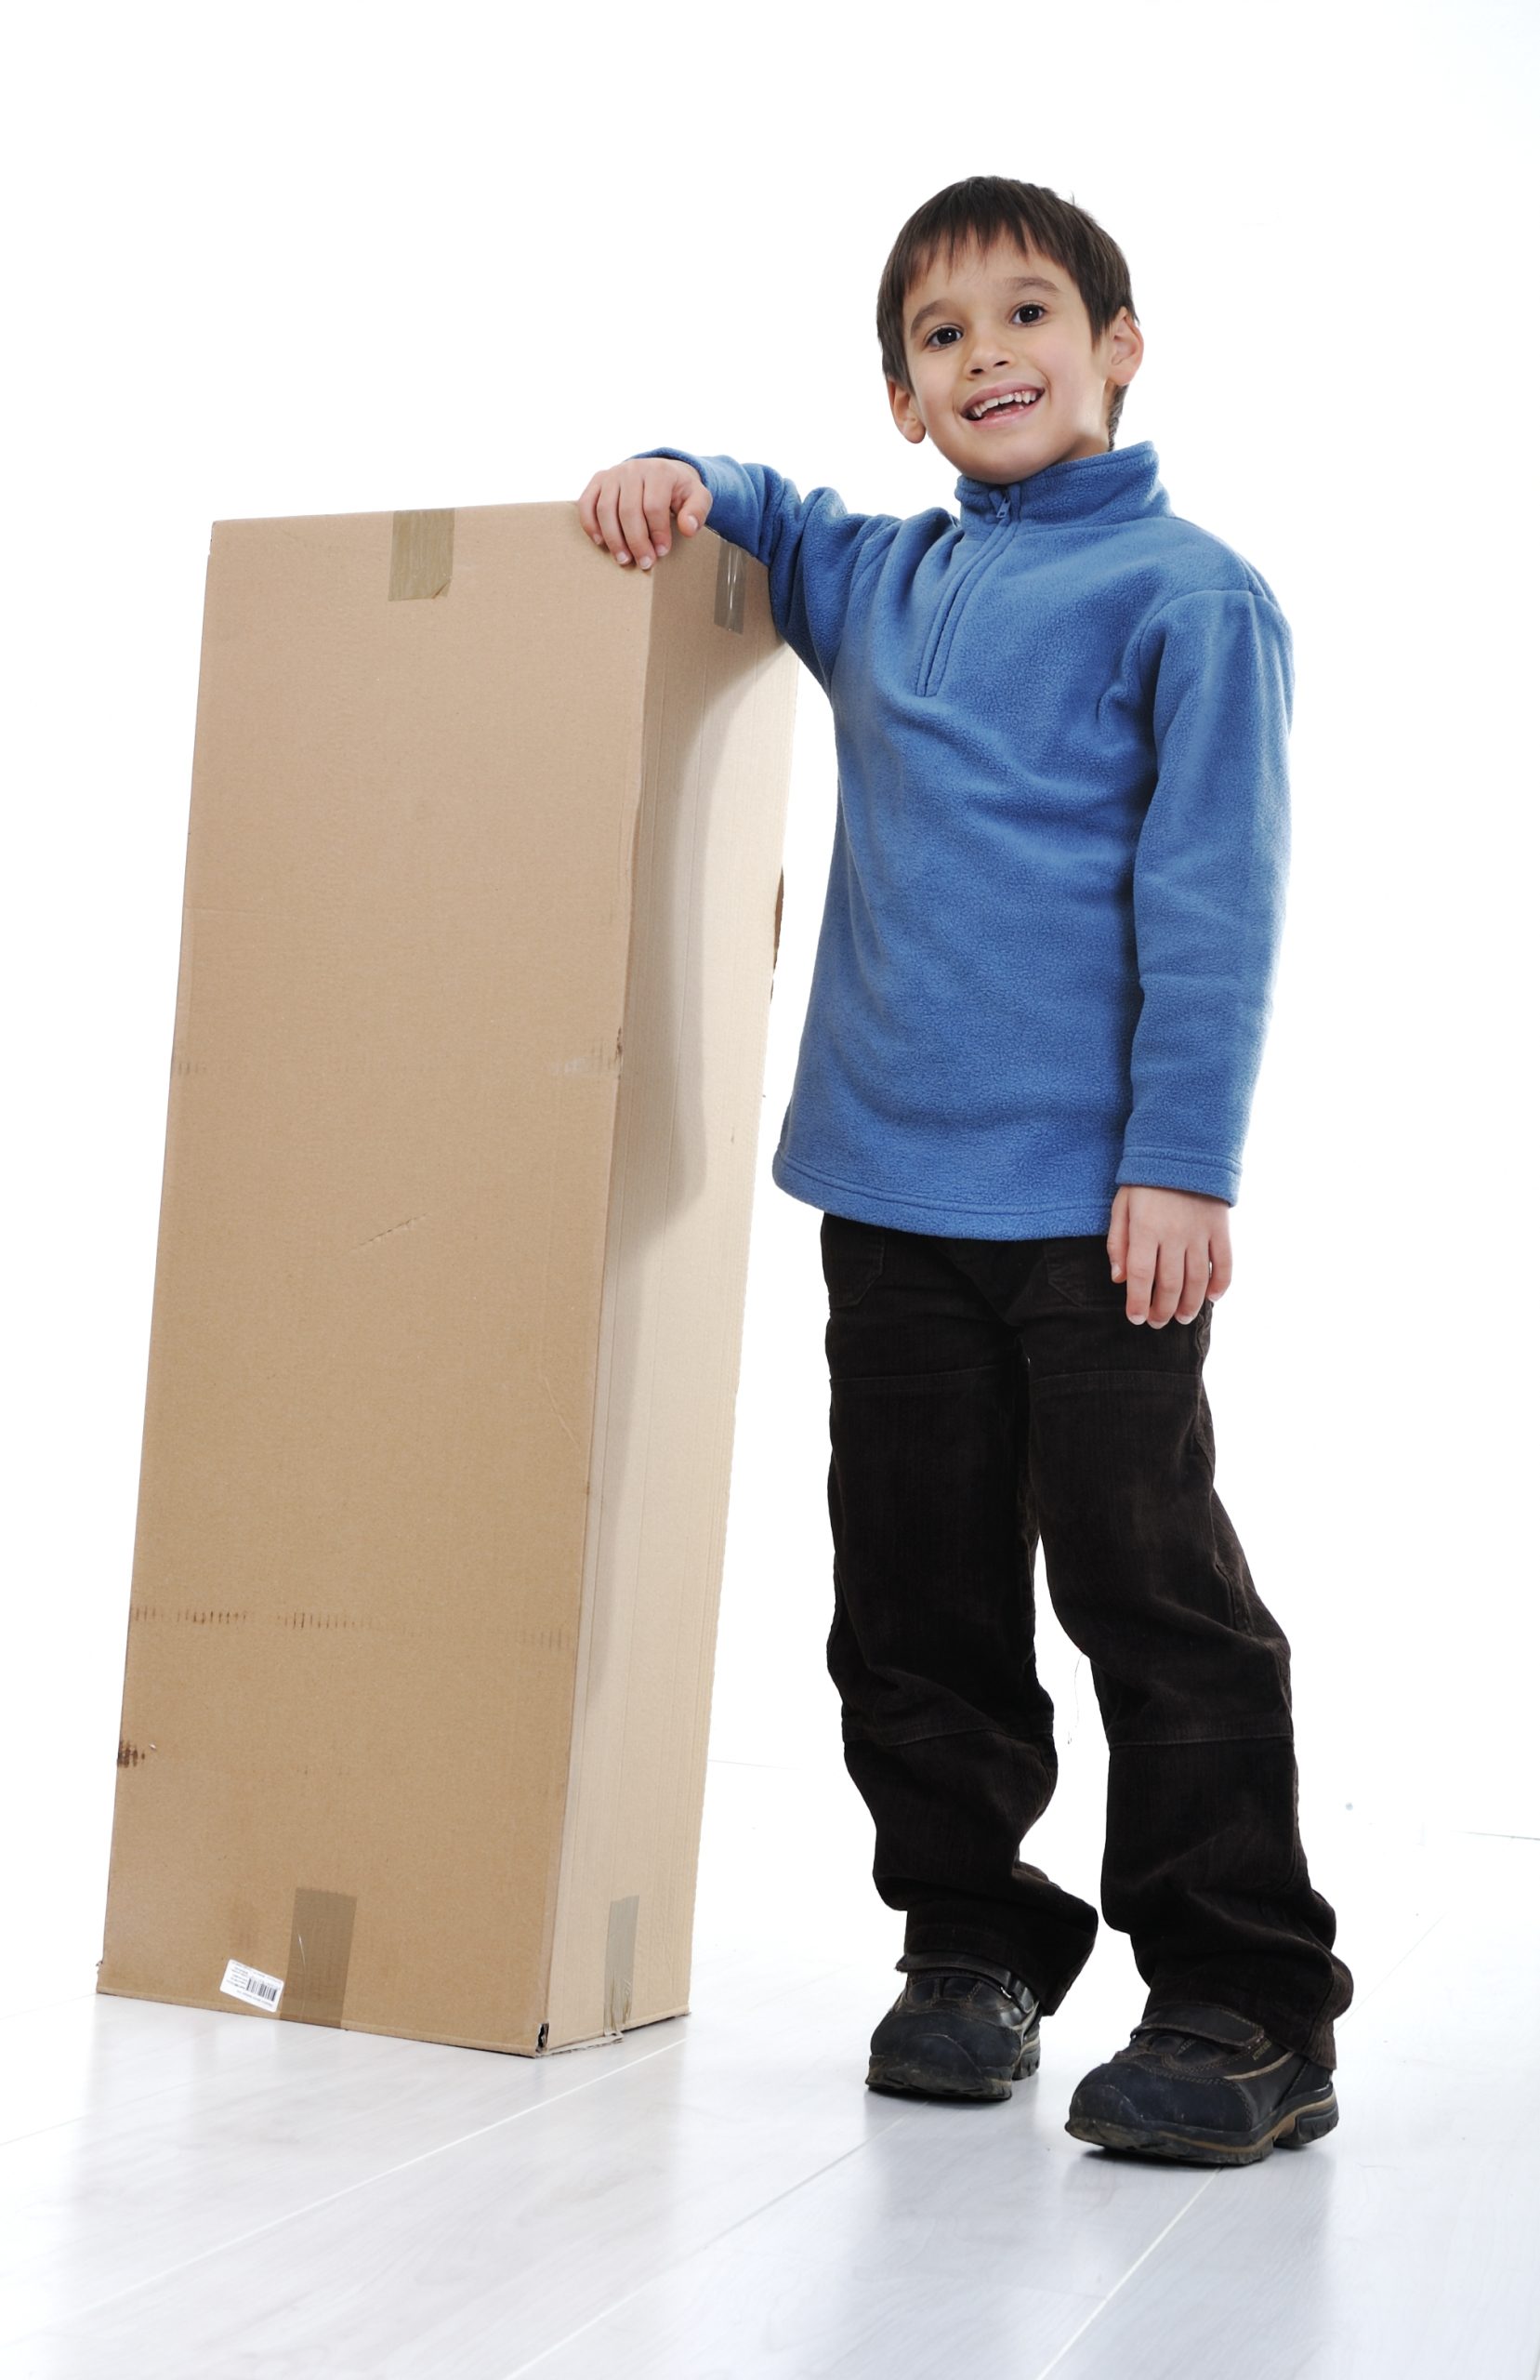 Young child with moving carton box